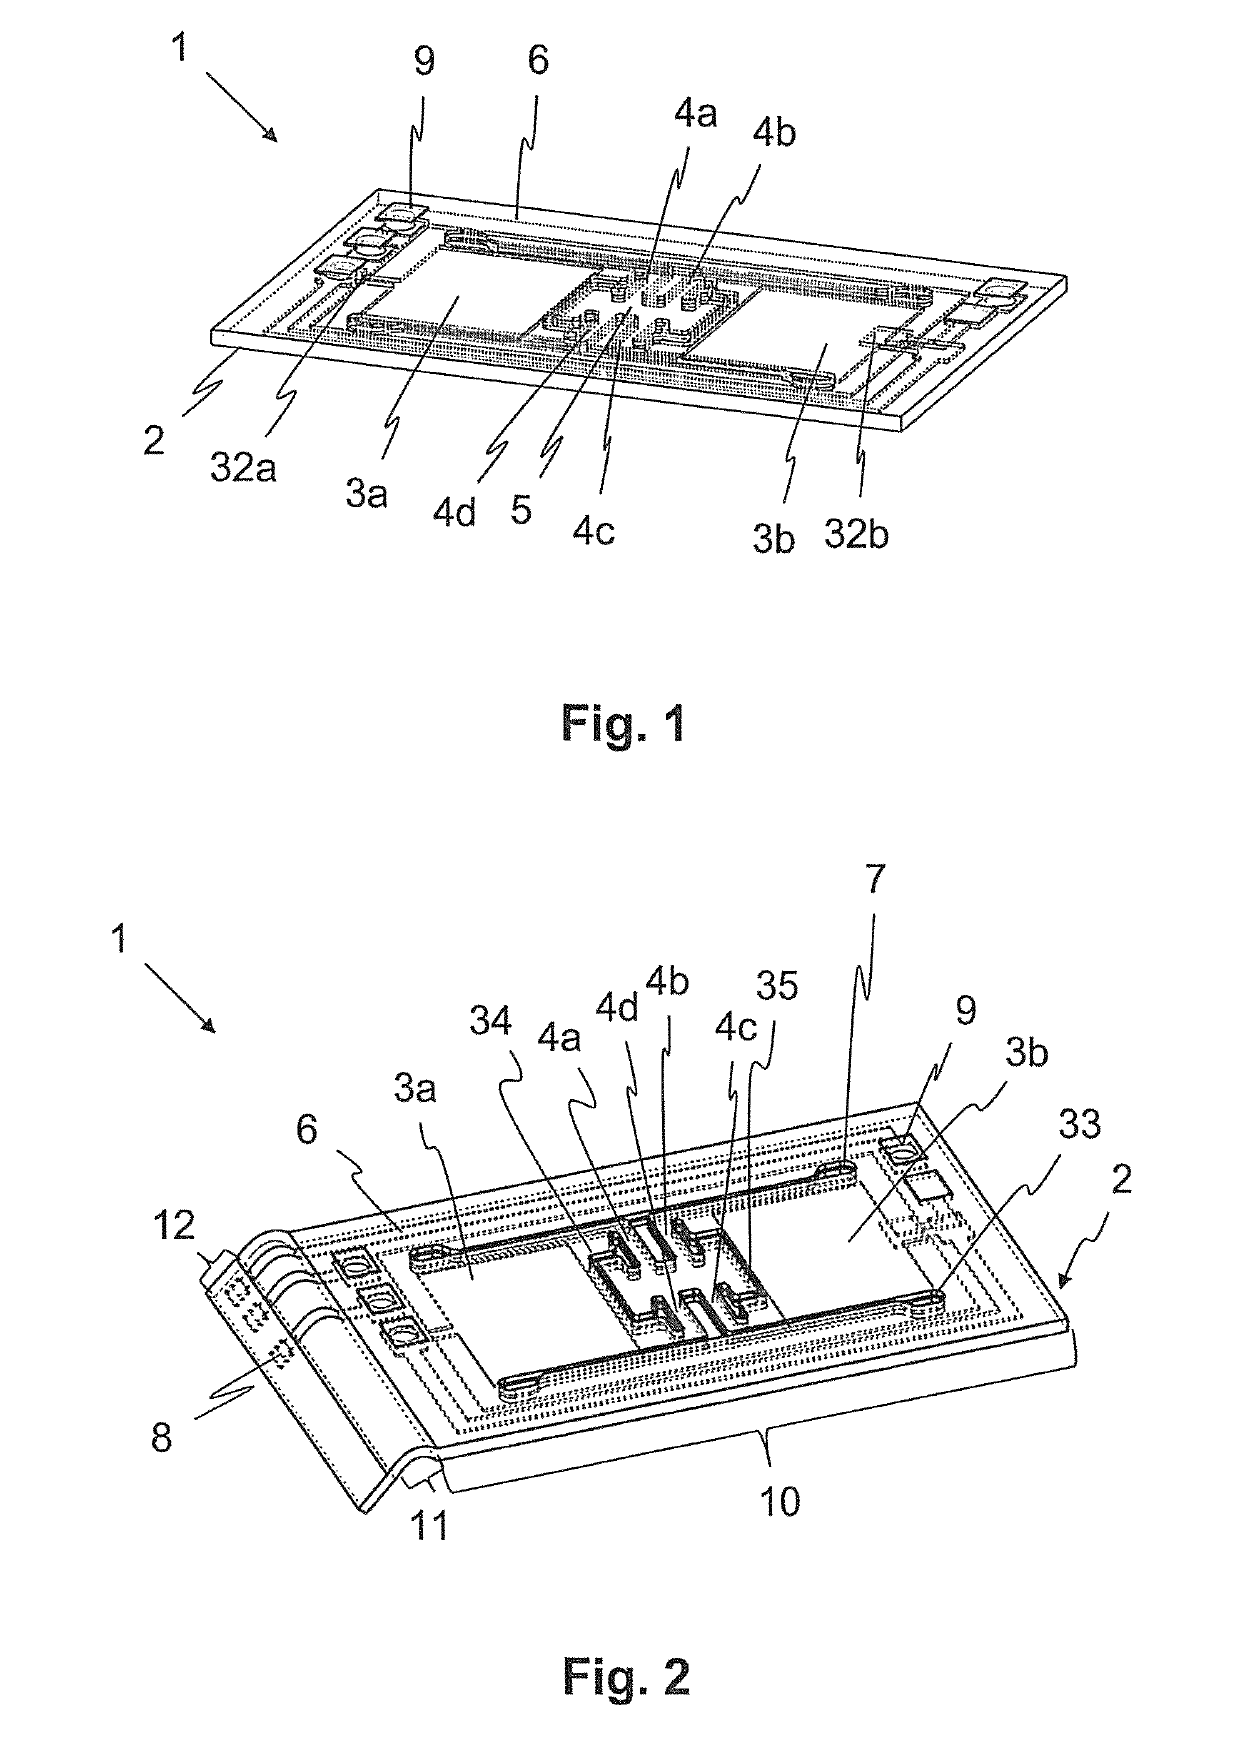 Flexible MEMS printed circuit board unit and sound transducer assembly